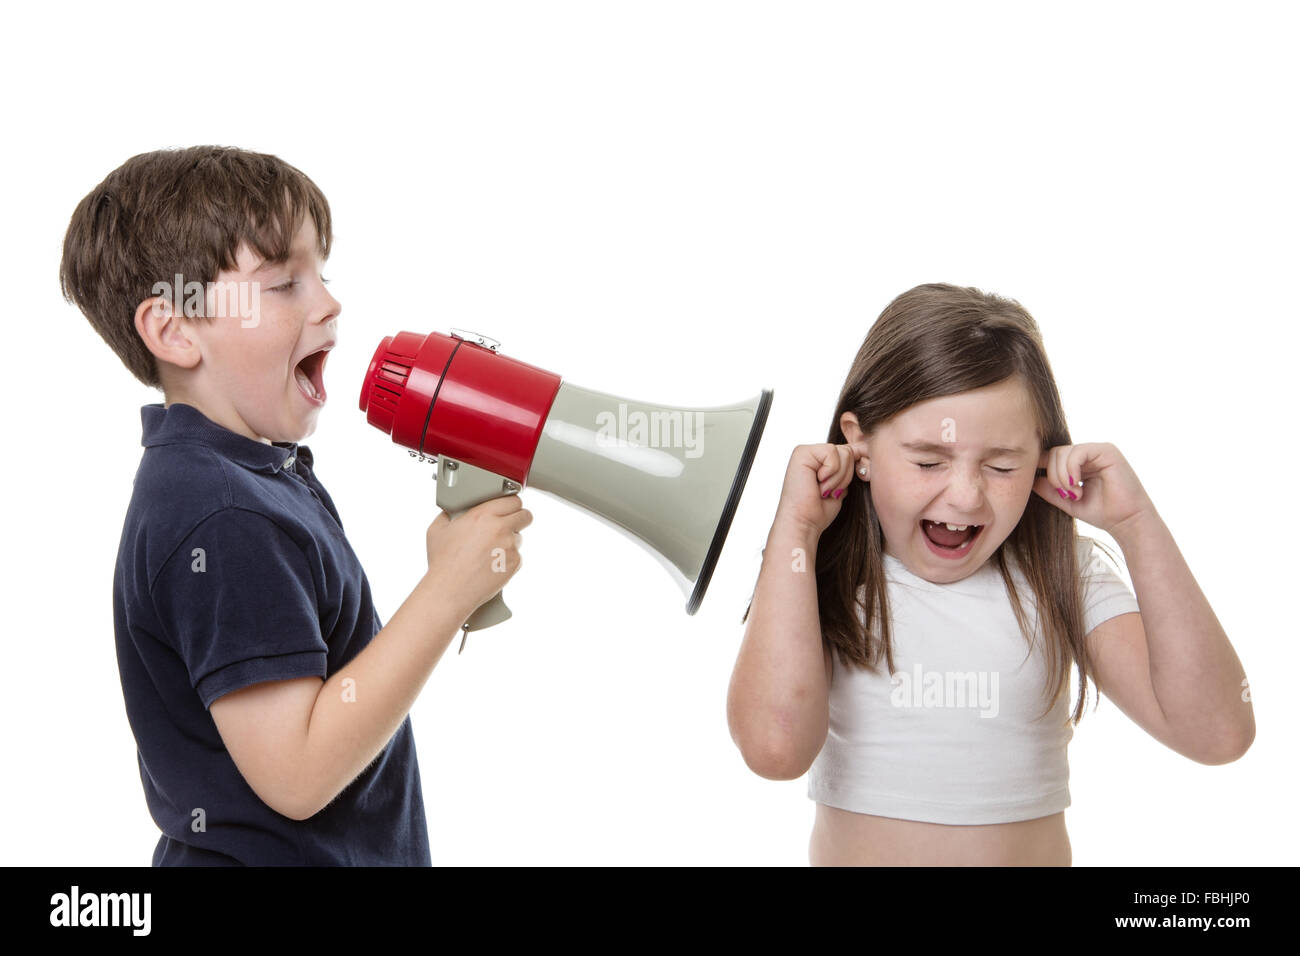 Young boy uses a bull horn to speak loudly into a girls ear Stock Photo